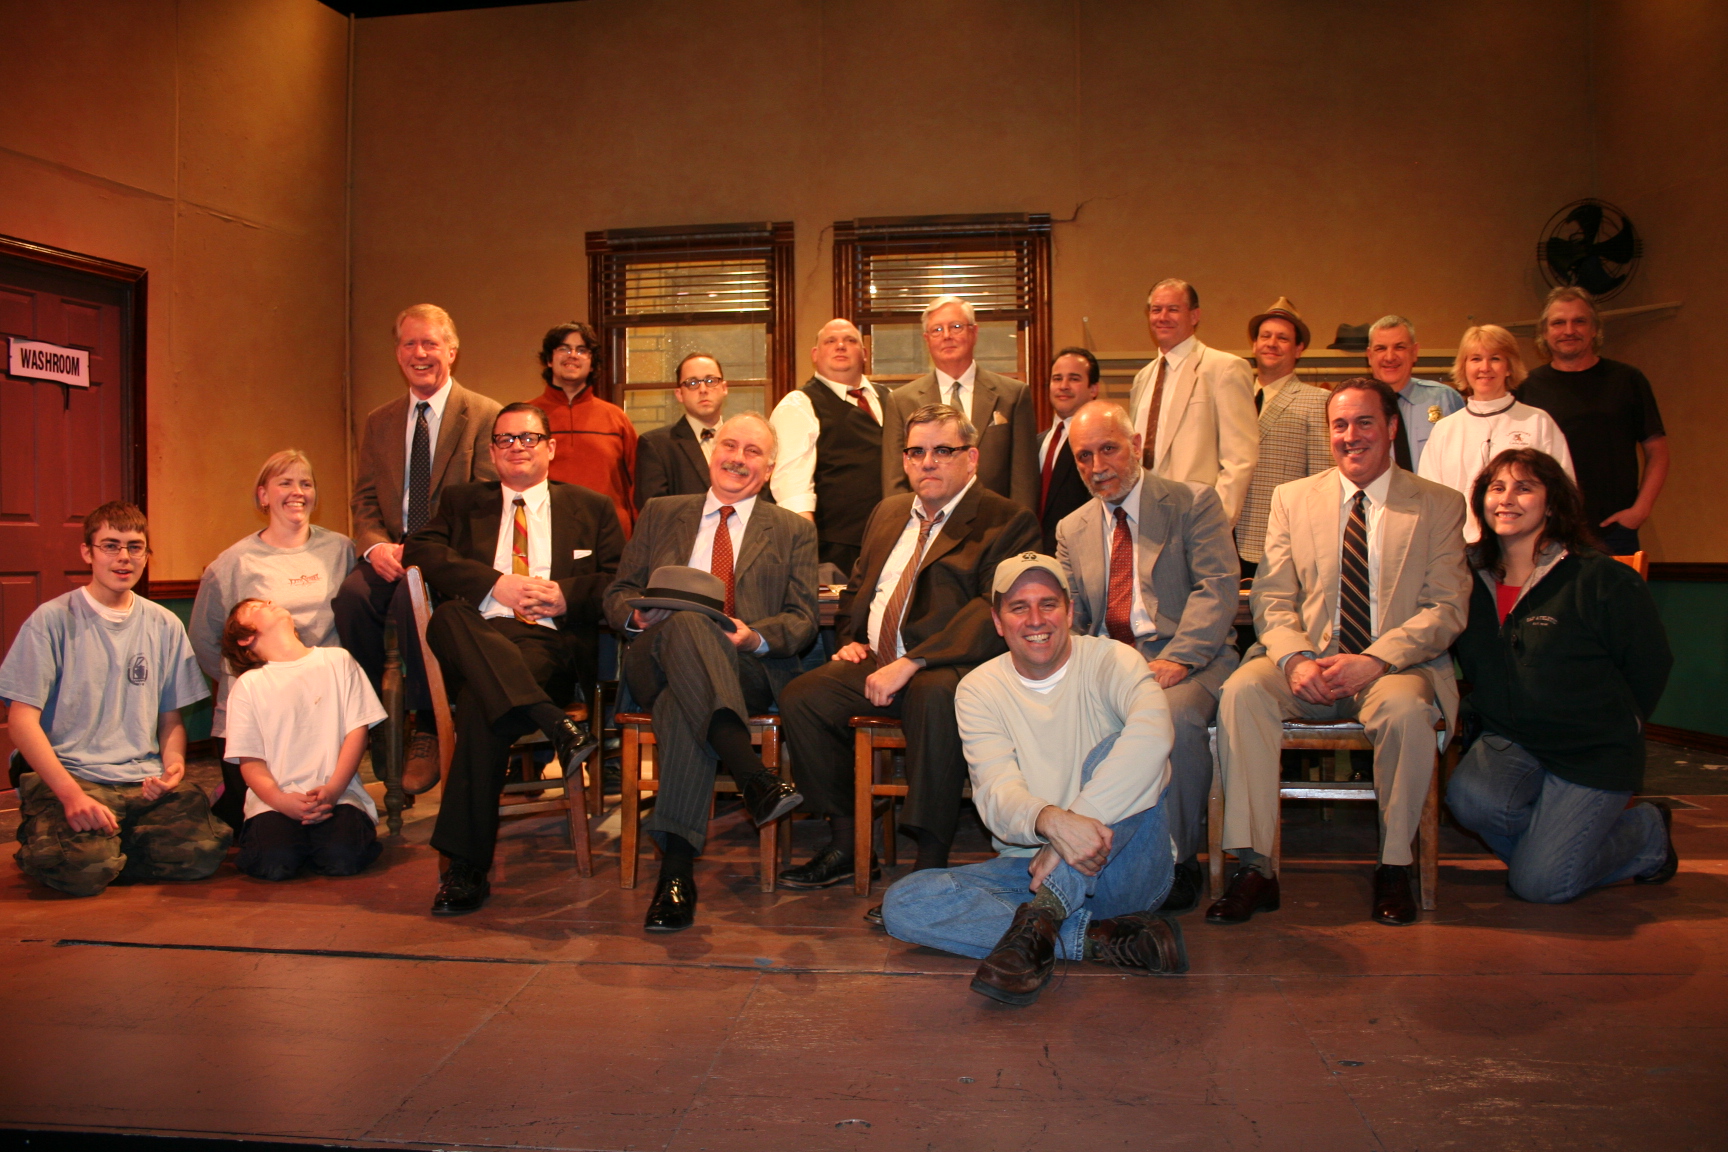 Scott Rollins with his cast and crew of 12 ANGRY MEN Norfolk, VA March 2010